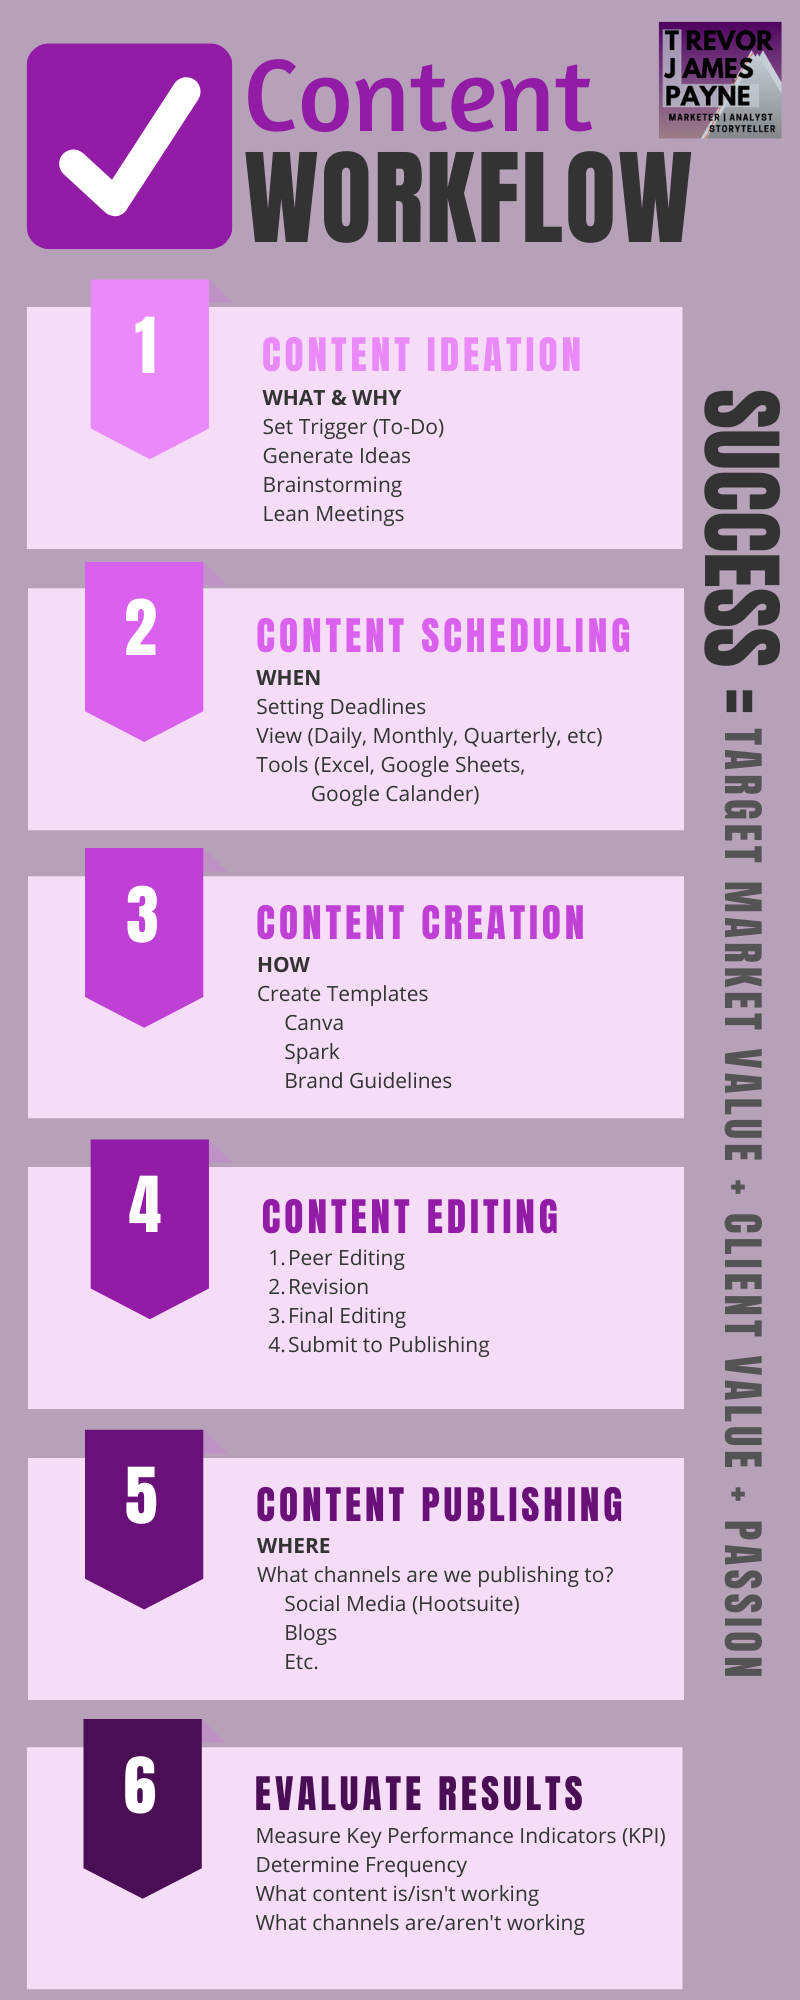 Content workflow: Content Ideation, Content scheduling, Content creation, Content editing, Content publishing, Evaluate results